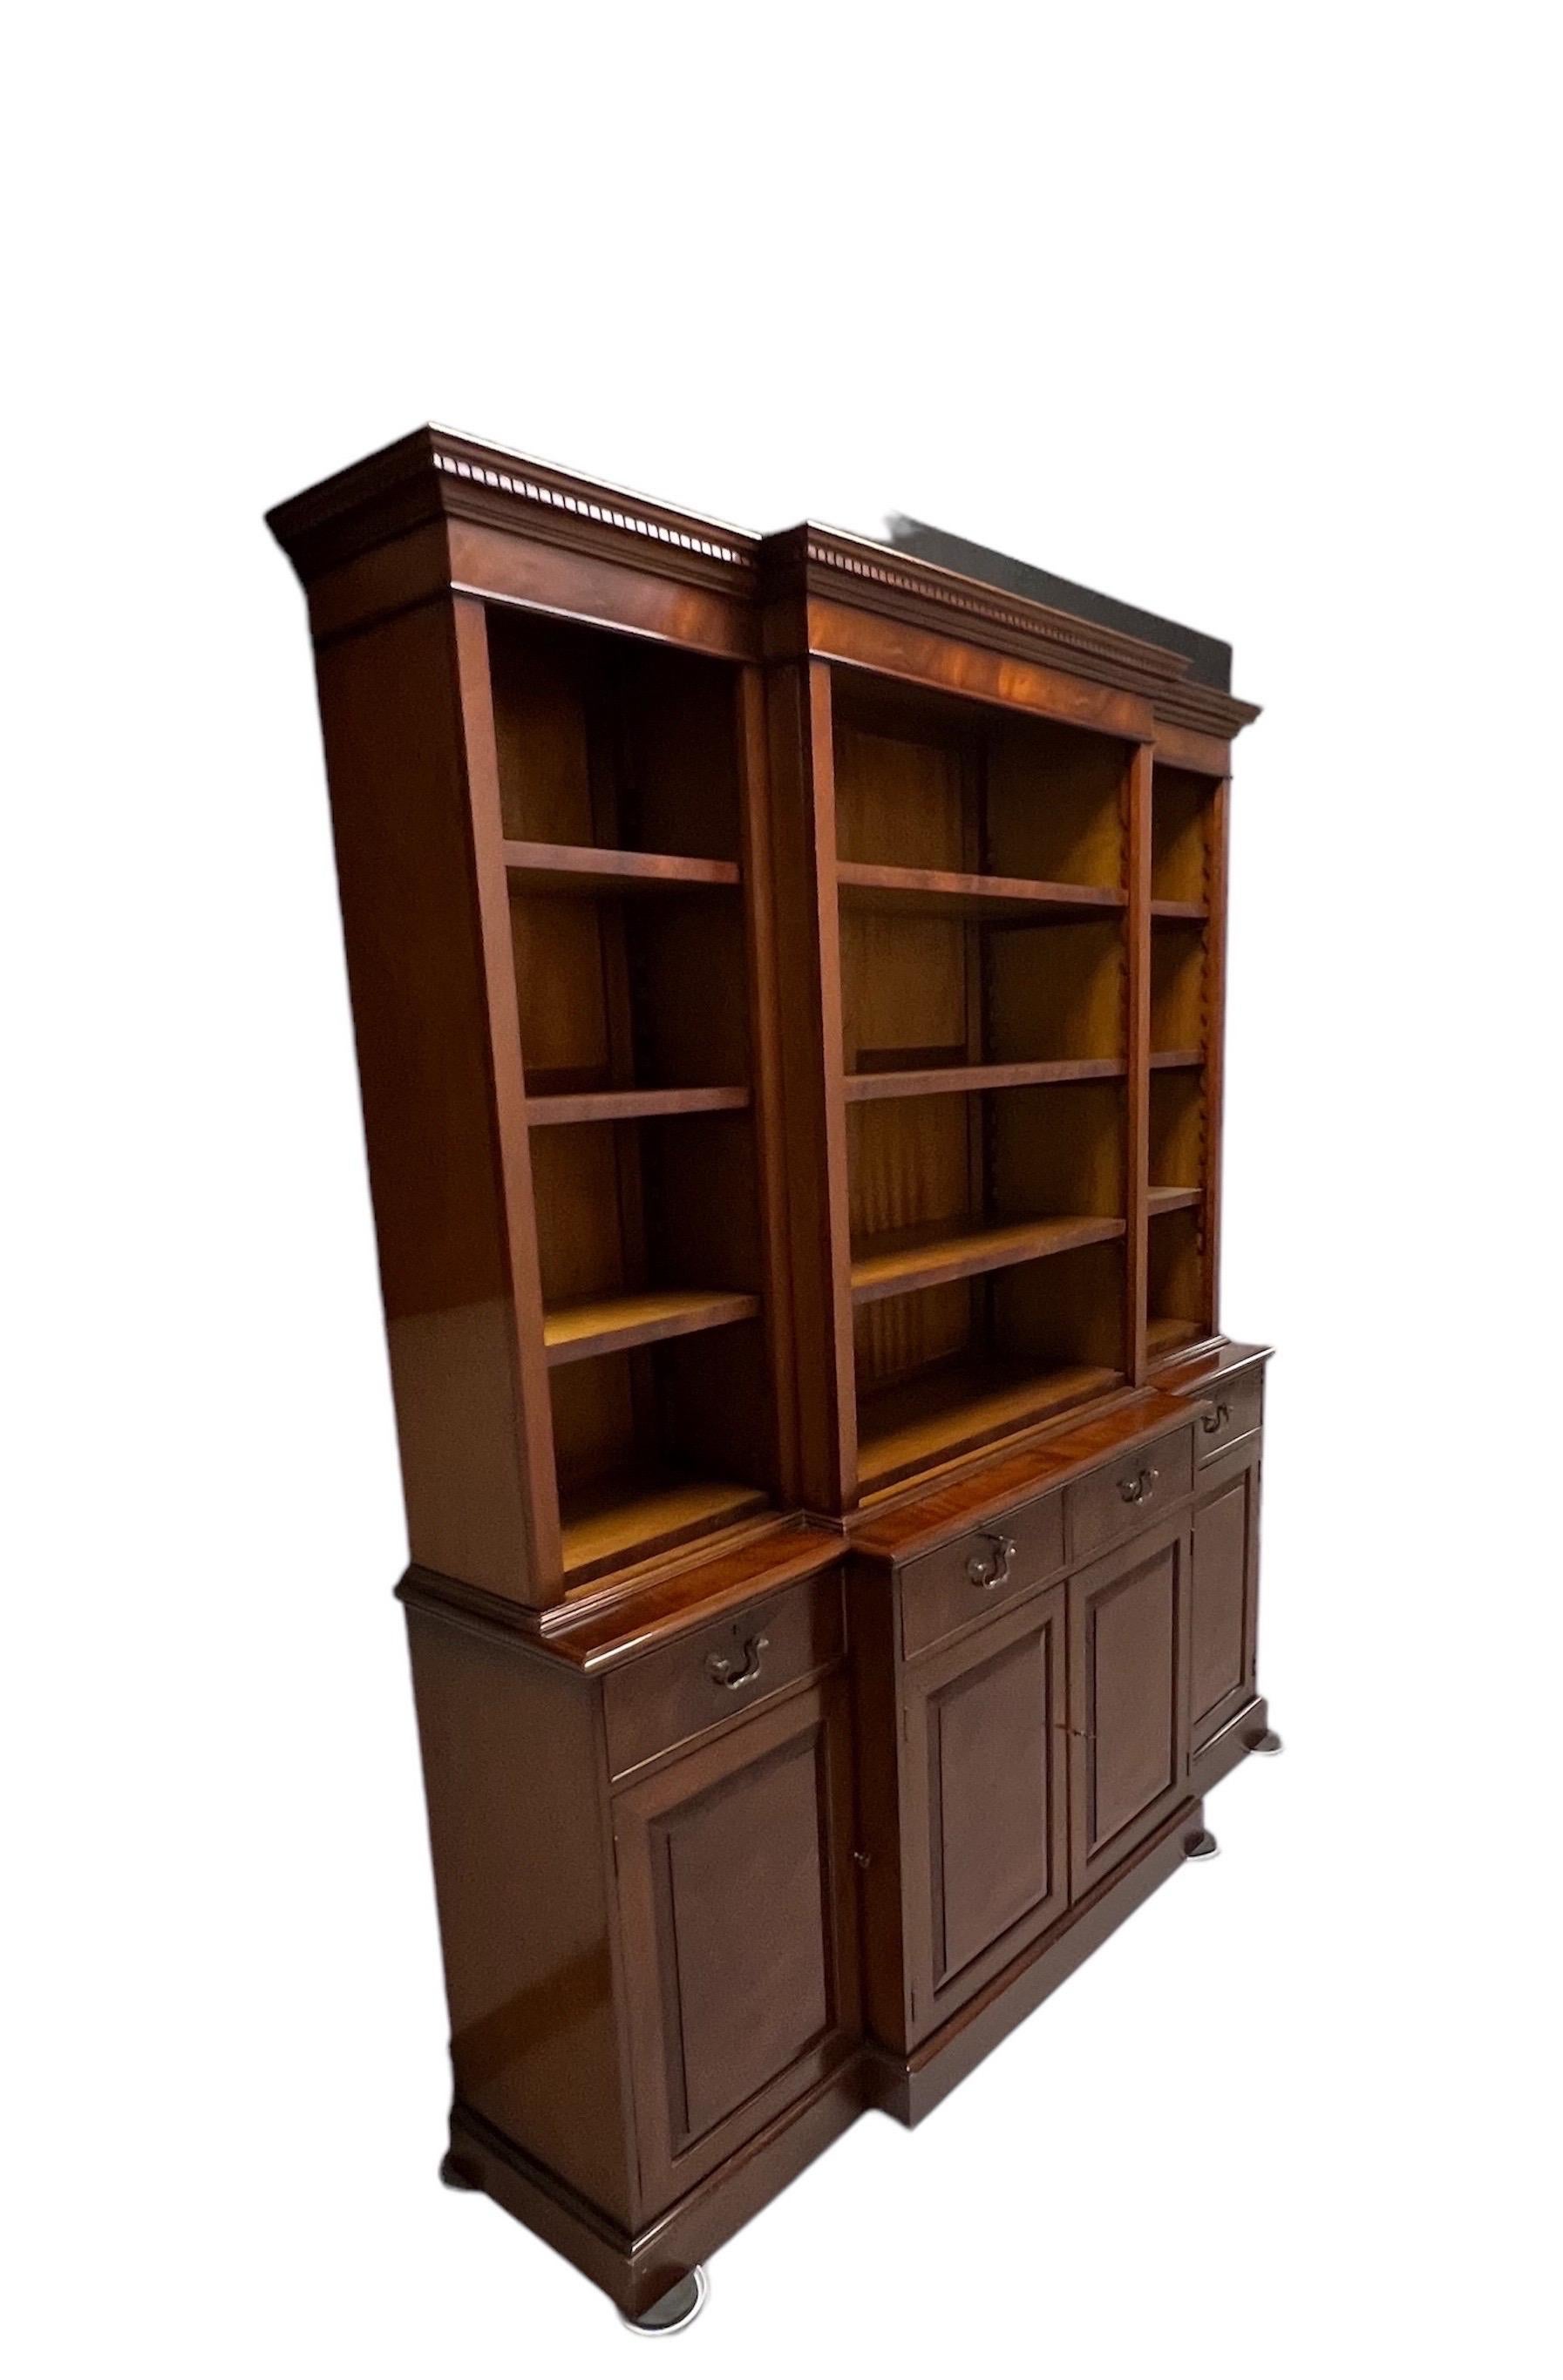 A George III Style Mahogany Breakfront Bookcase
With open bookshelf configuration on the top. With 12 adjustable bookshelves on the top, half and four stationary shelves inside the lowercase section also with four drawers. 3 keys 